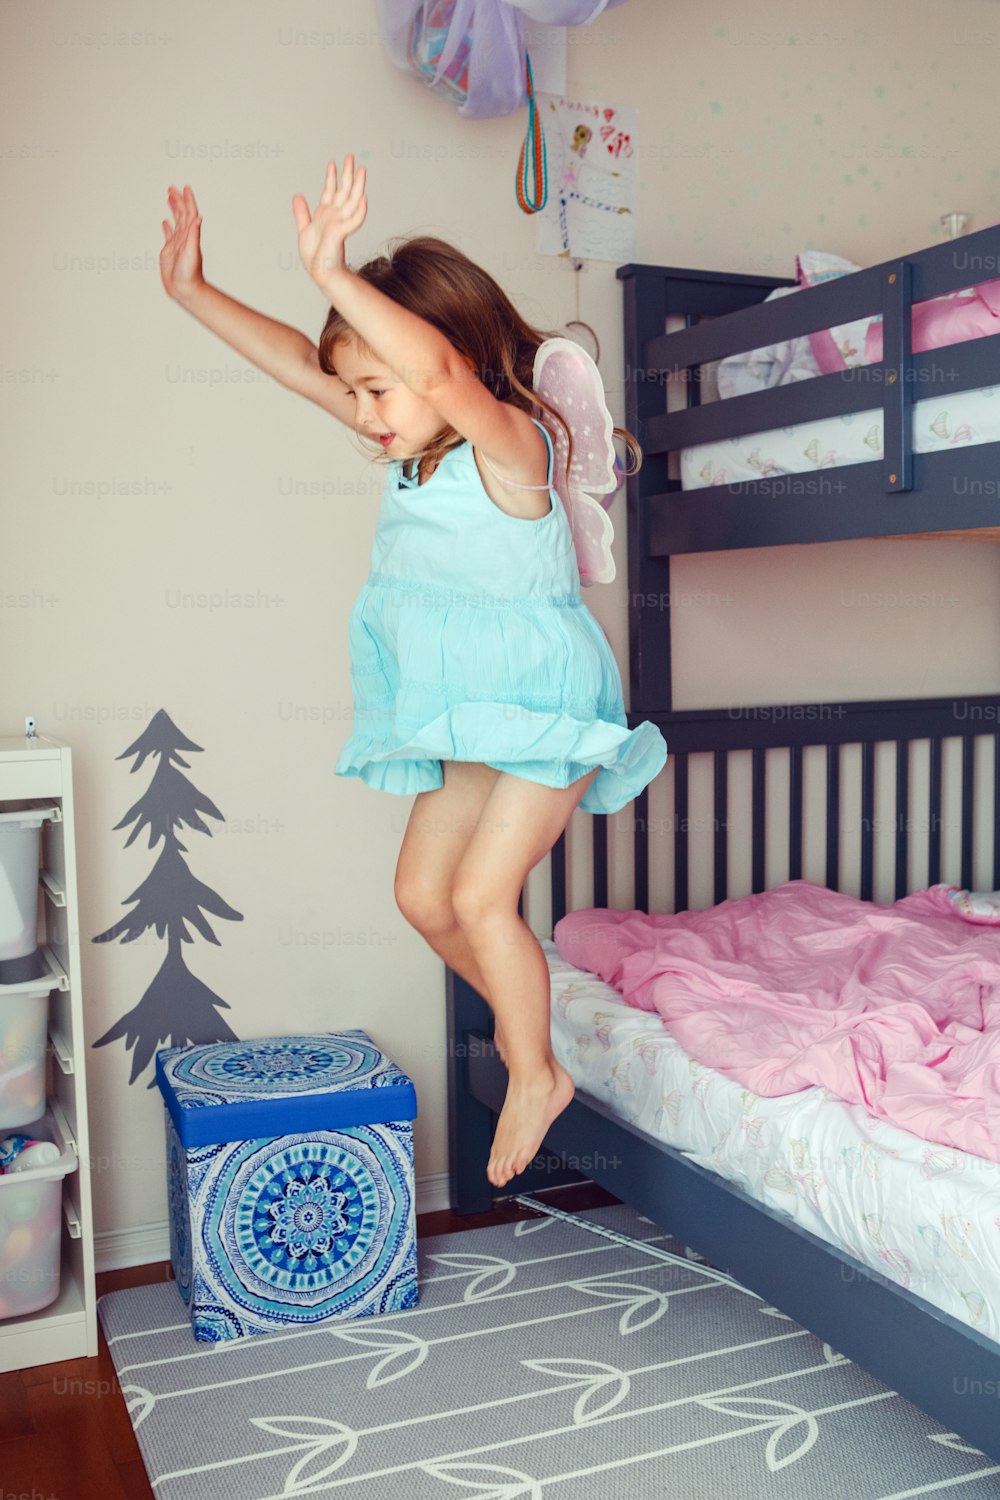 Cute Caucasian girl jumping from bed. Happy excited kid having fun at home. Adorable child playing game flying like elf or fairy. Authentic action candid lifestyle domestic life moment.